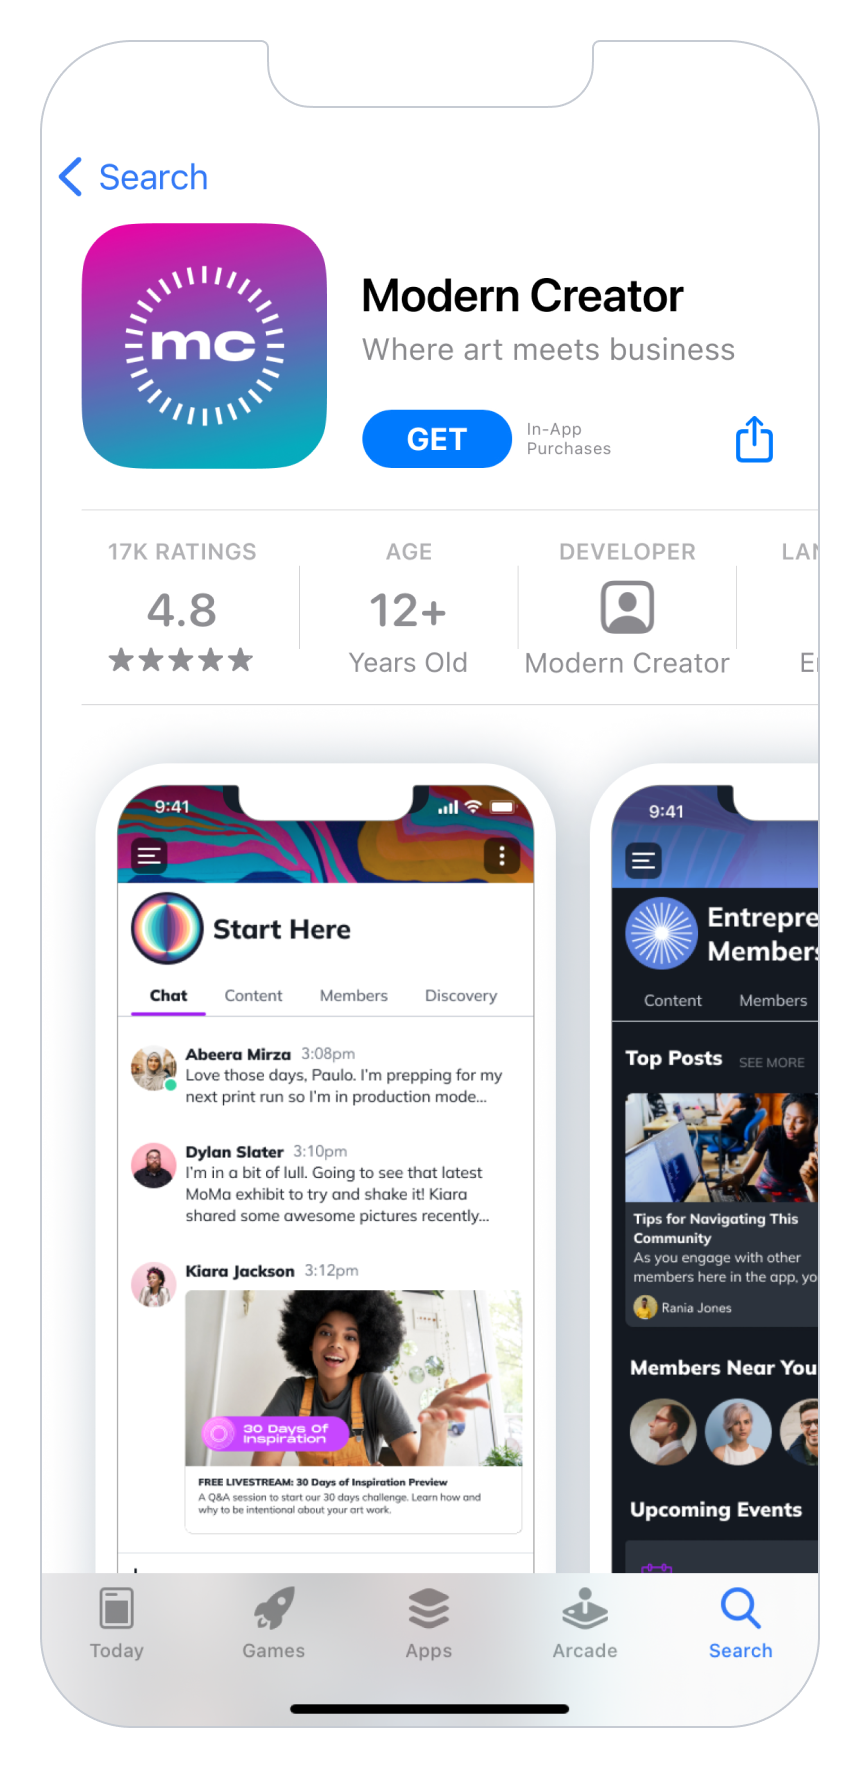 Put your brand in the app stores with Mighty Pro white-labeled iOS and Android apps. You get control over your Apple App Store and Google Play Store listings. Promote your app in ads, social content, on podcasts, and grow with organic app store discovery.